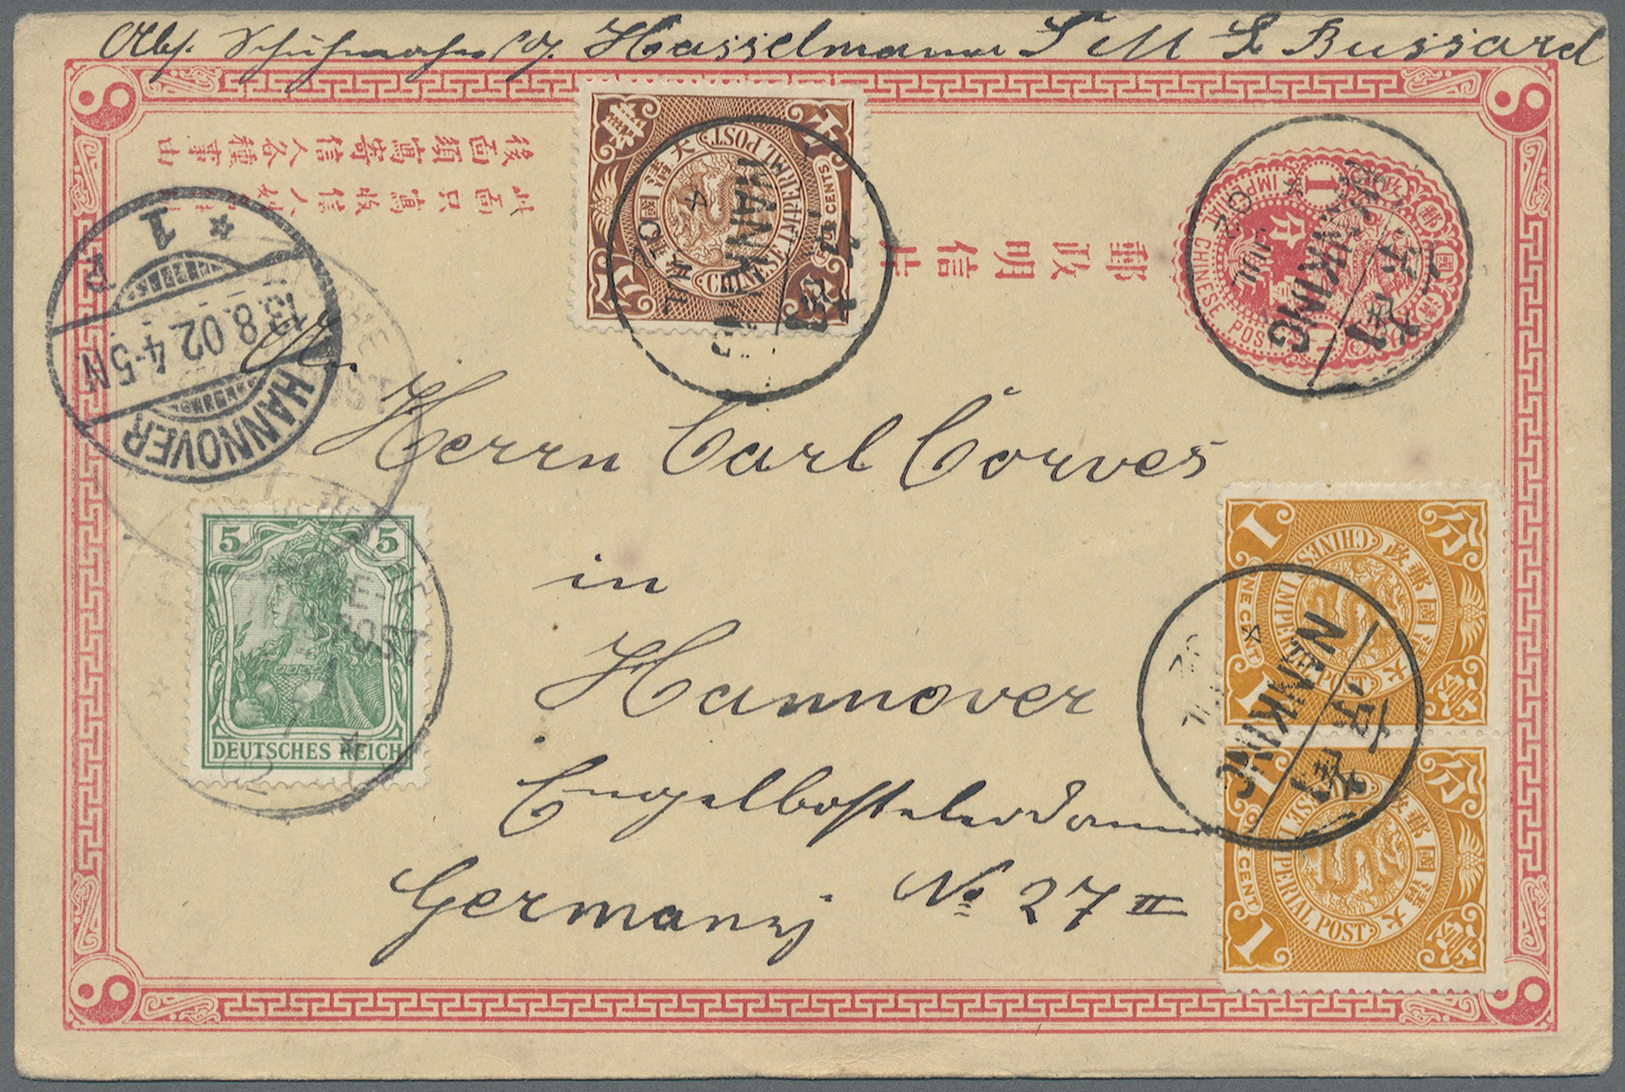 GA China - Ganzsachen: 1897, ICP 1 C. Uprated 1 C. (pair), 4 C. Tied "NANKING 4 JUL 02" Used As Form W. Germany 5 Pf. Gr - Cartes Postales